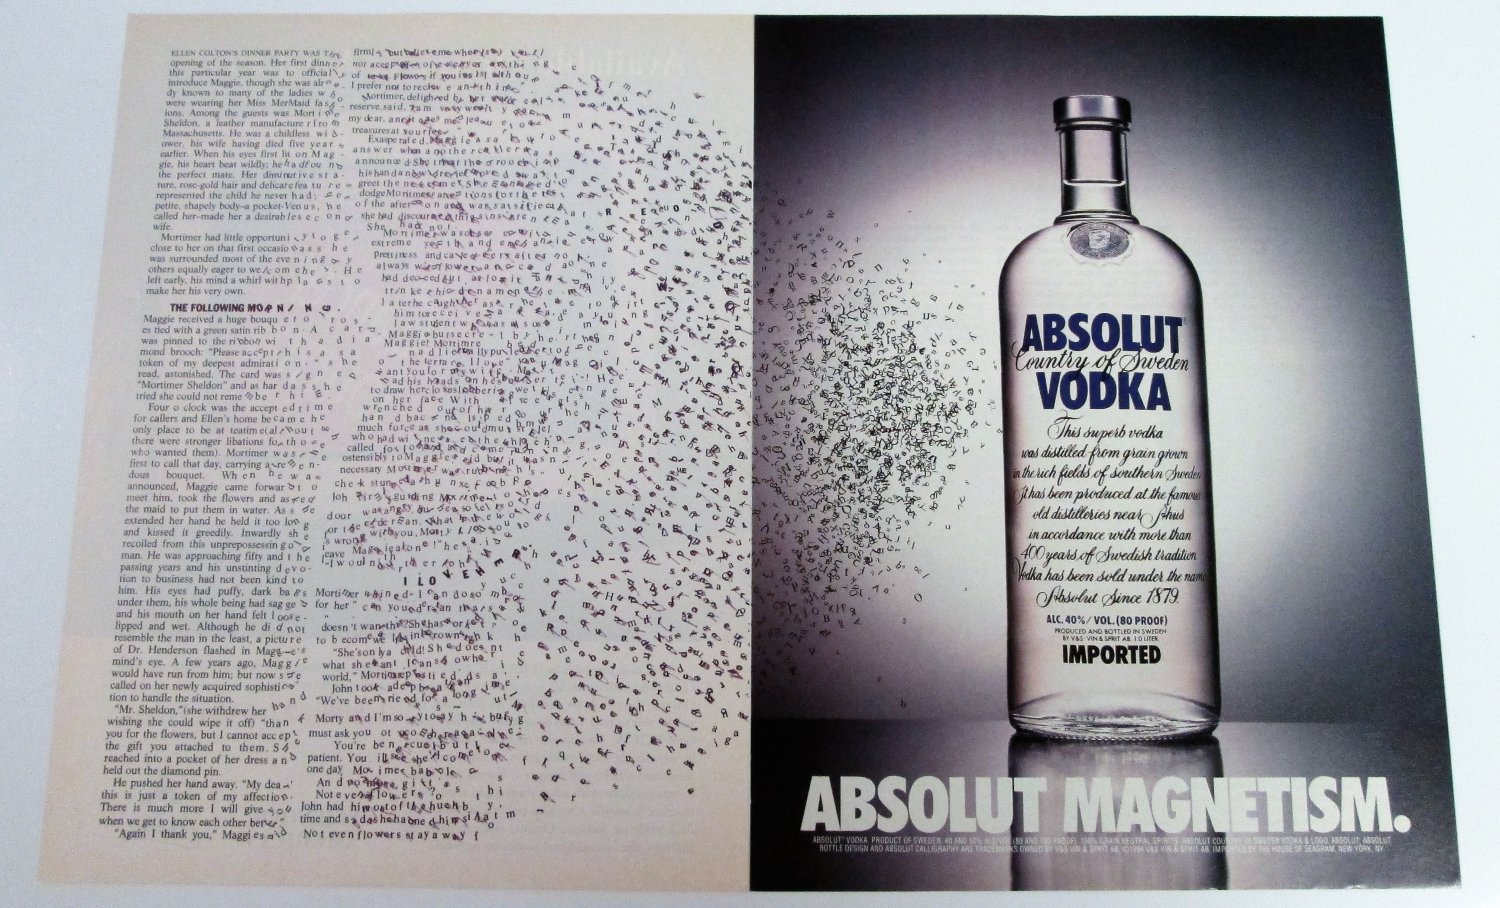 ABSOLUT MAGNETISM Vodka Magazine Ad - 2 Pages